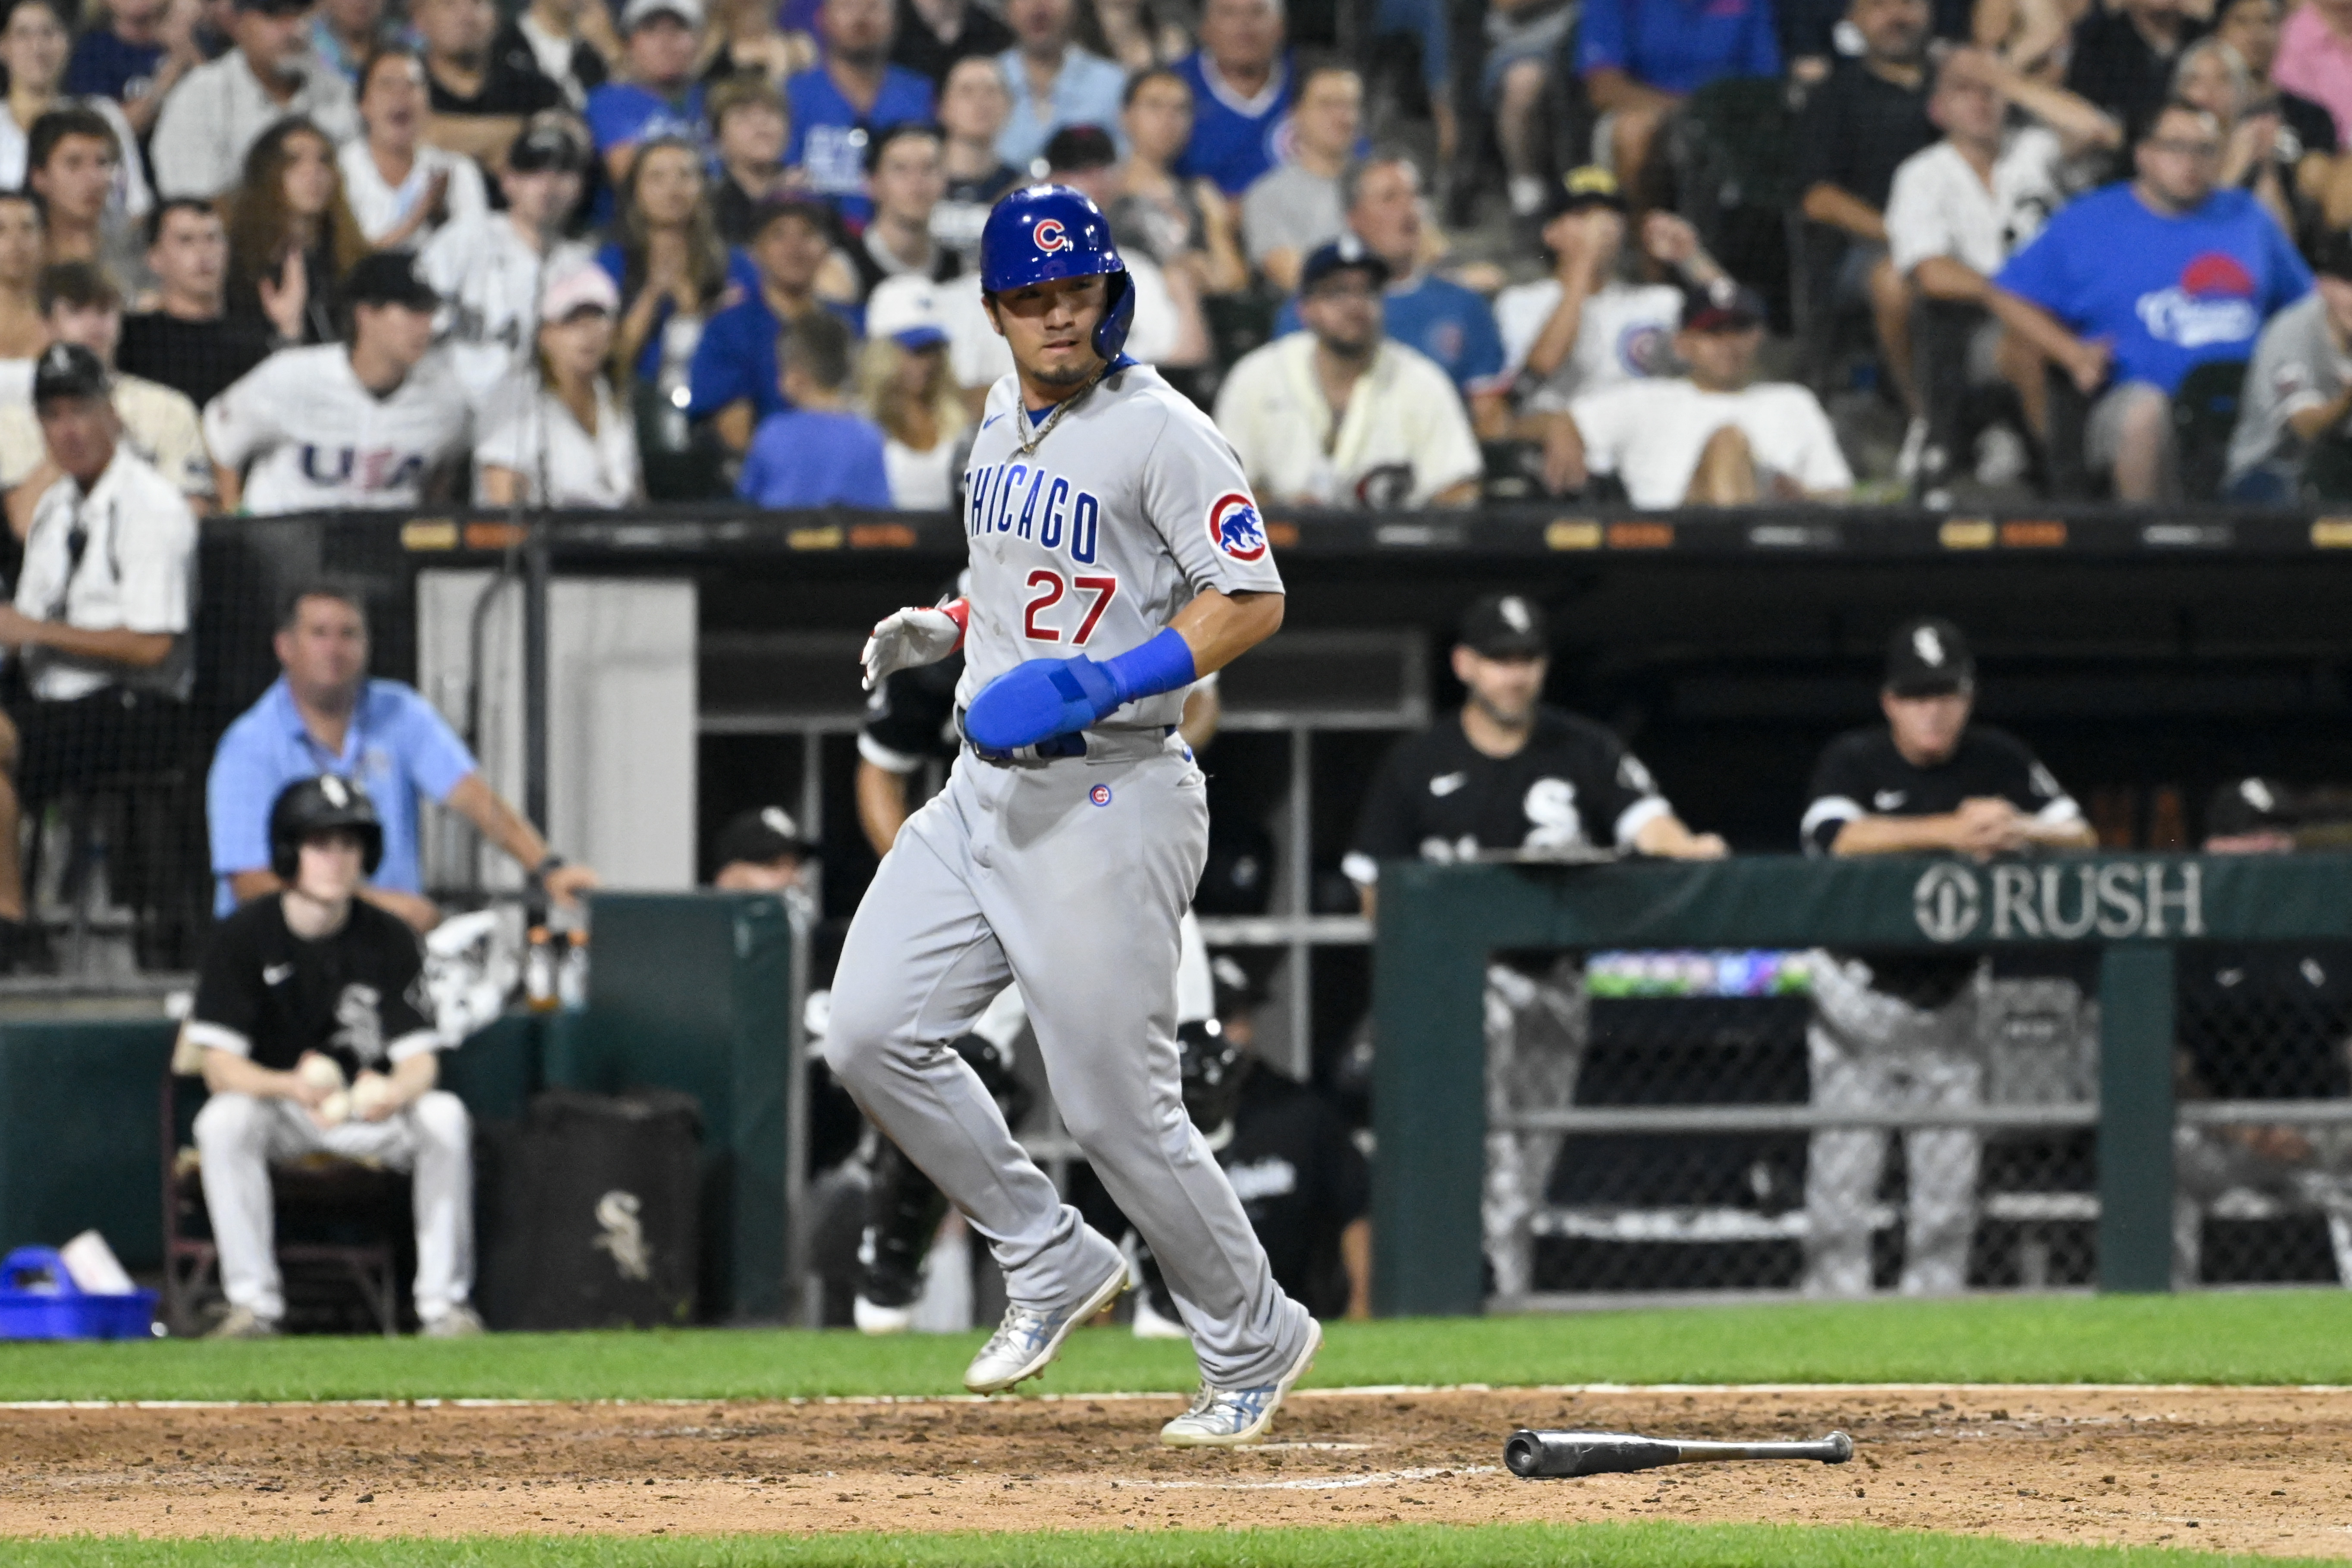 Cubs come back from five-run defict to topple White Sox, complete